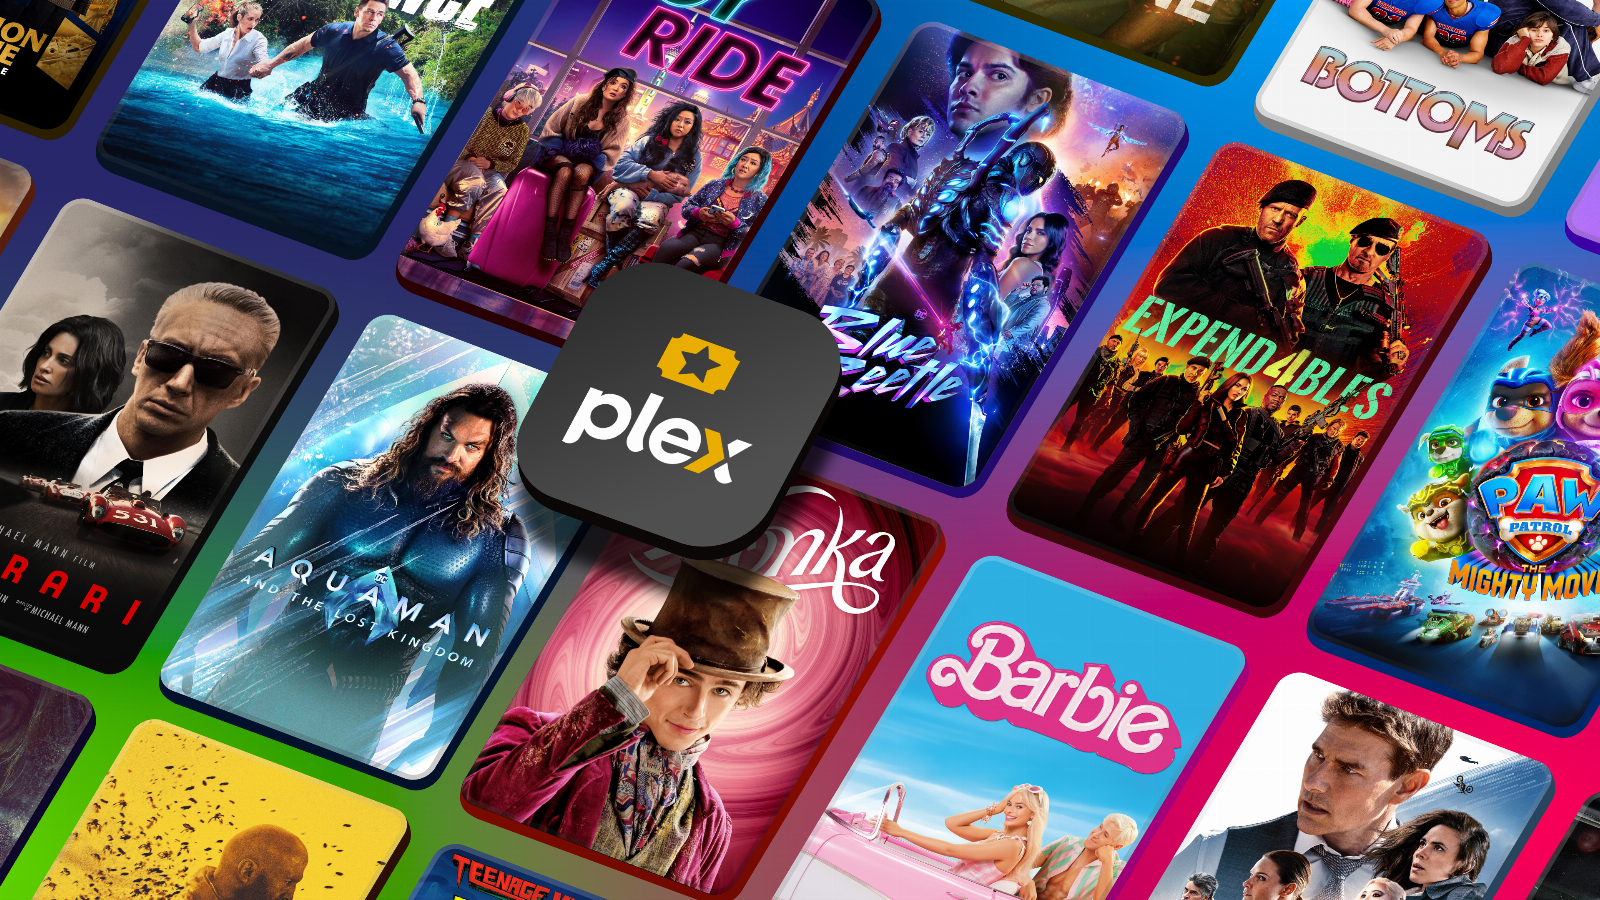 Streamer Plex launches its long-promised movie rentals store